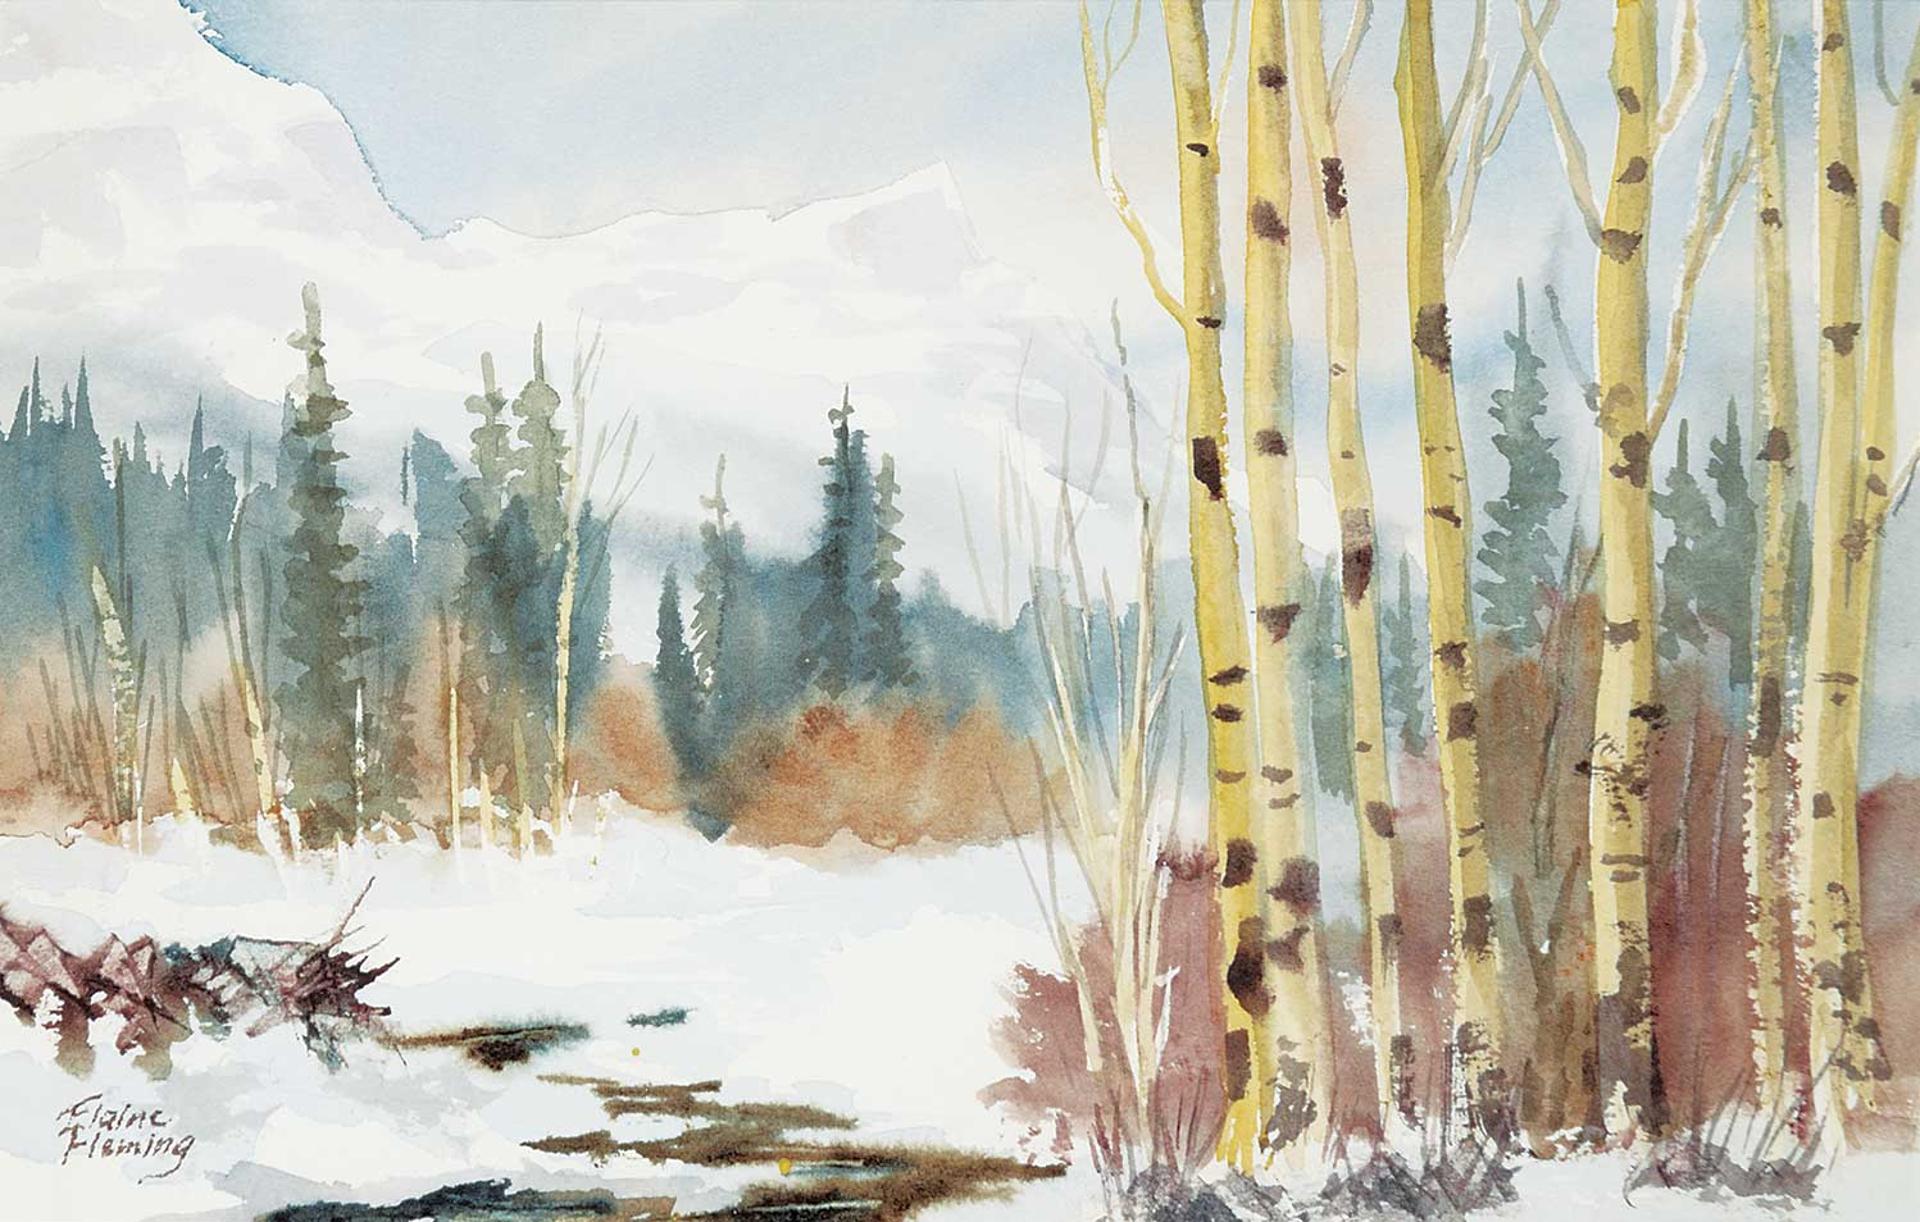 Elaine Fleming (1928-2014) - Untitled - Birch Trees in Winter